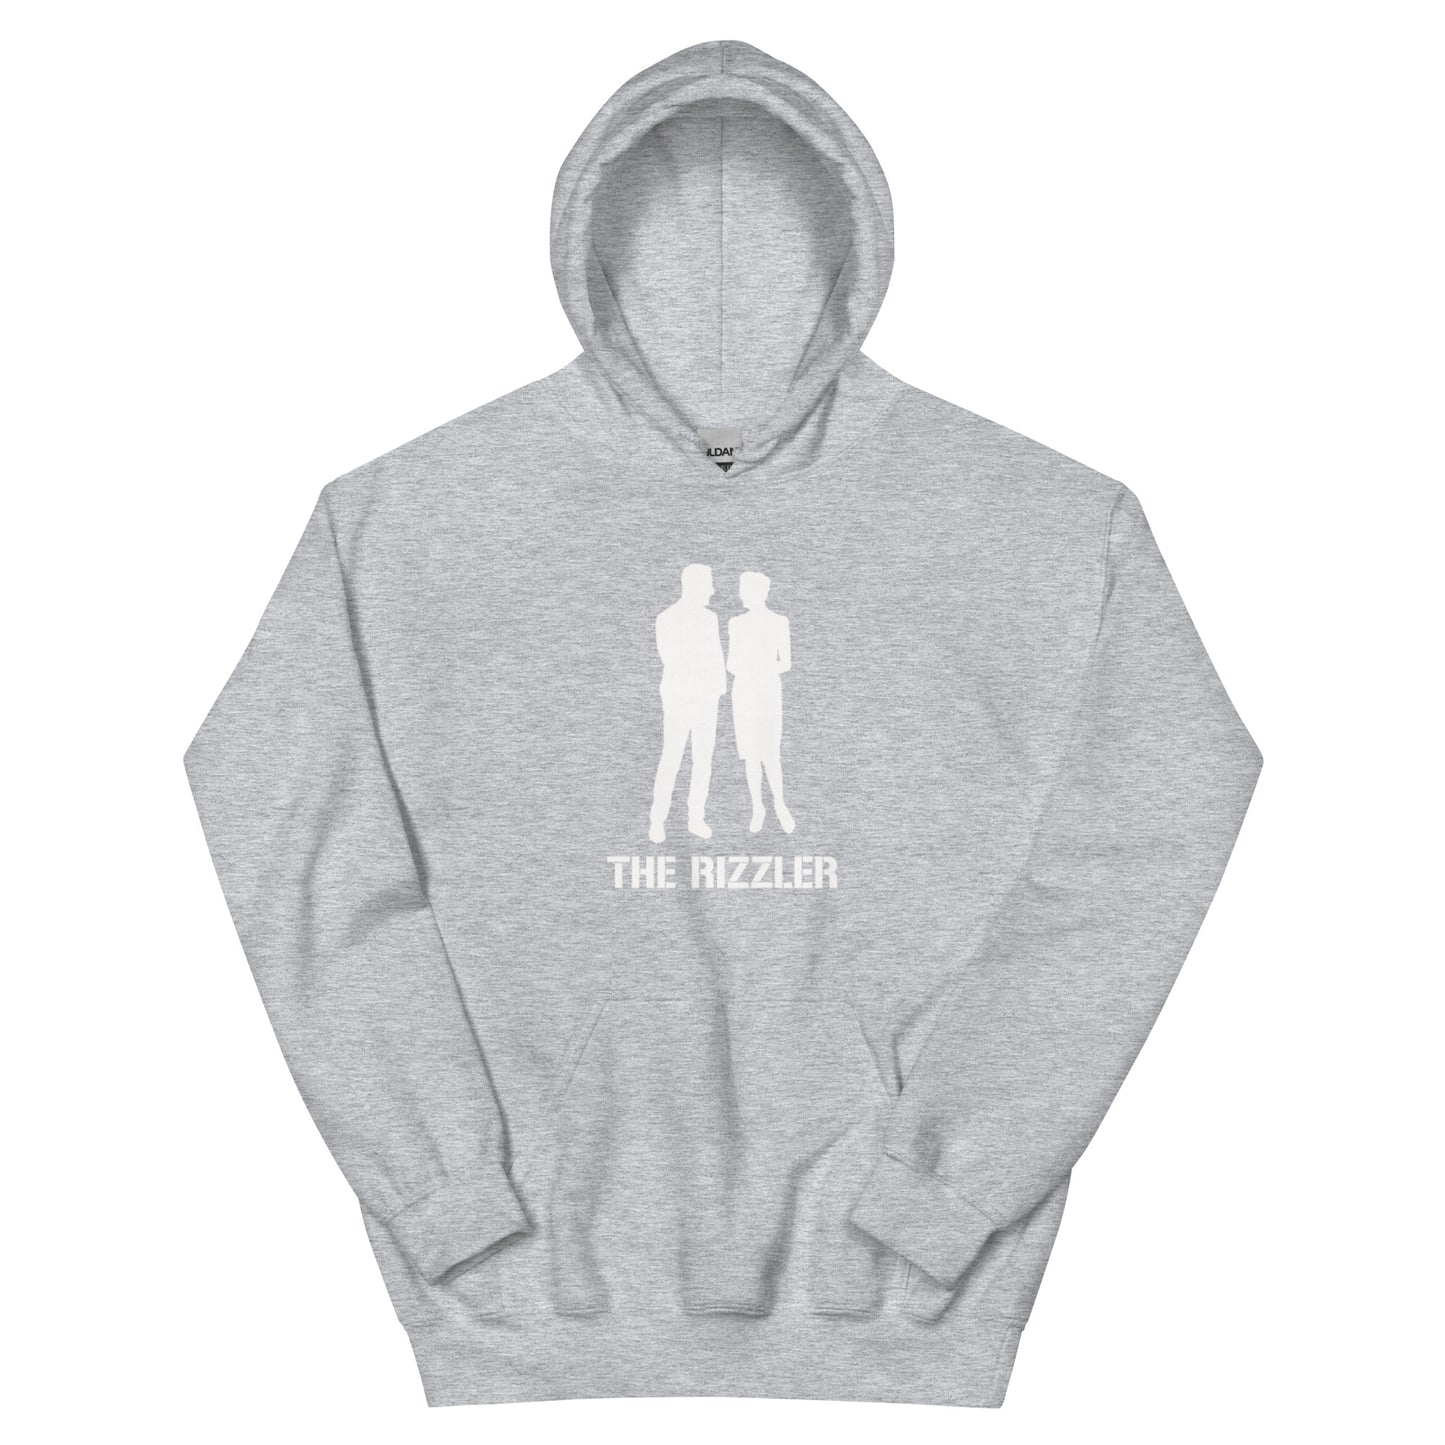 The Rizzler Hoodie